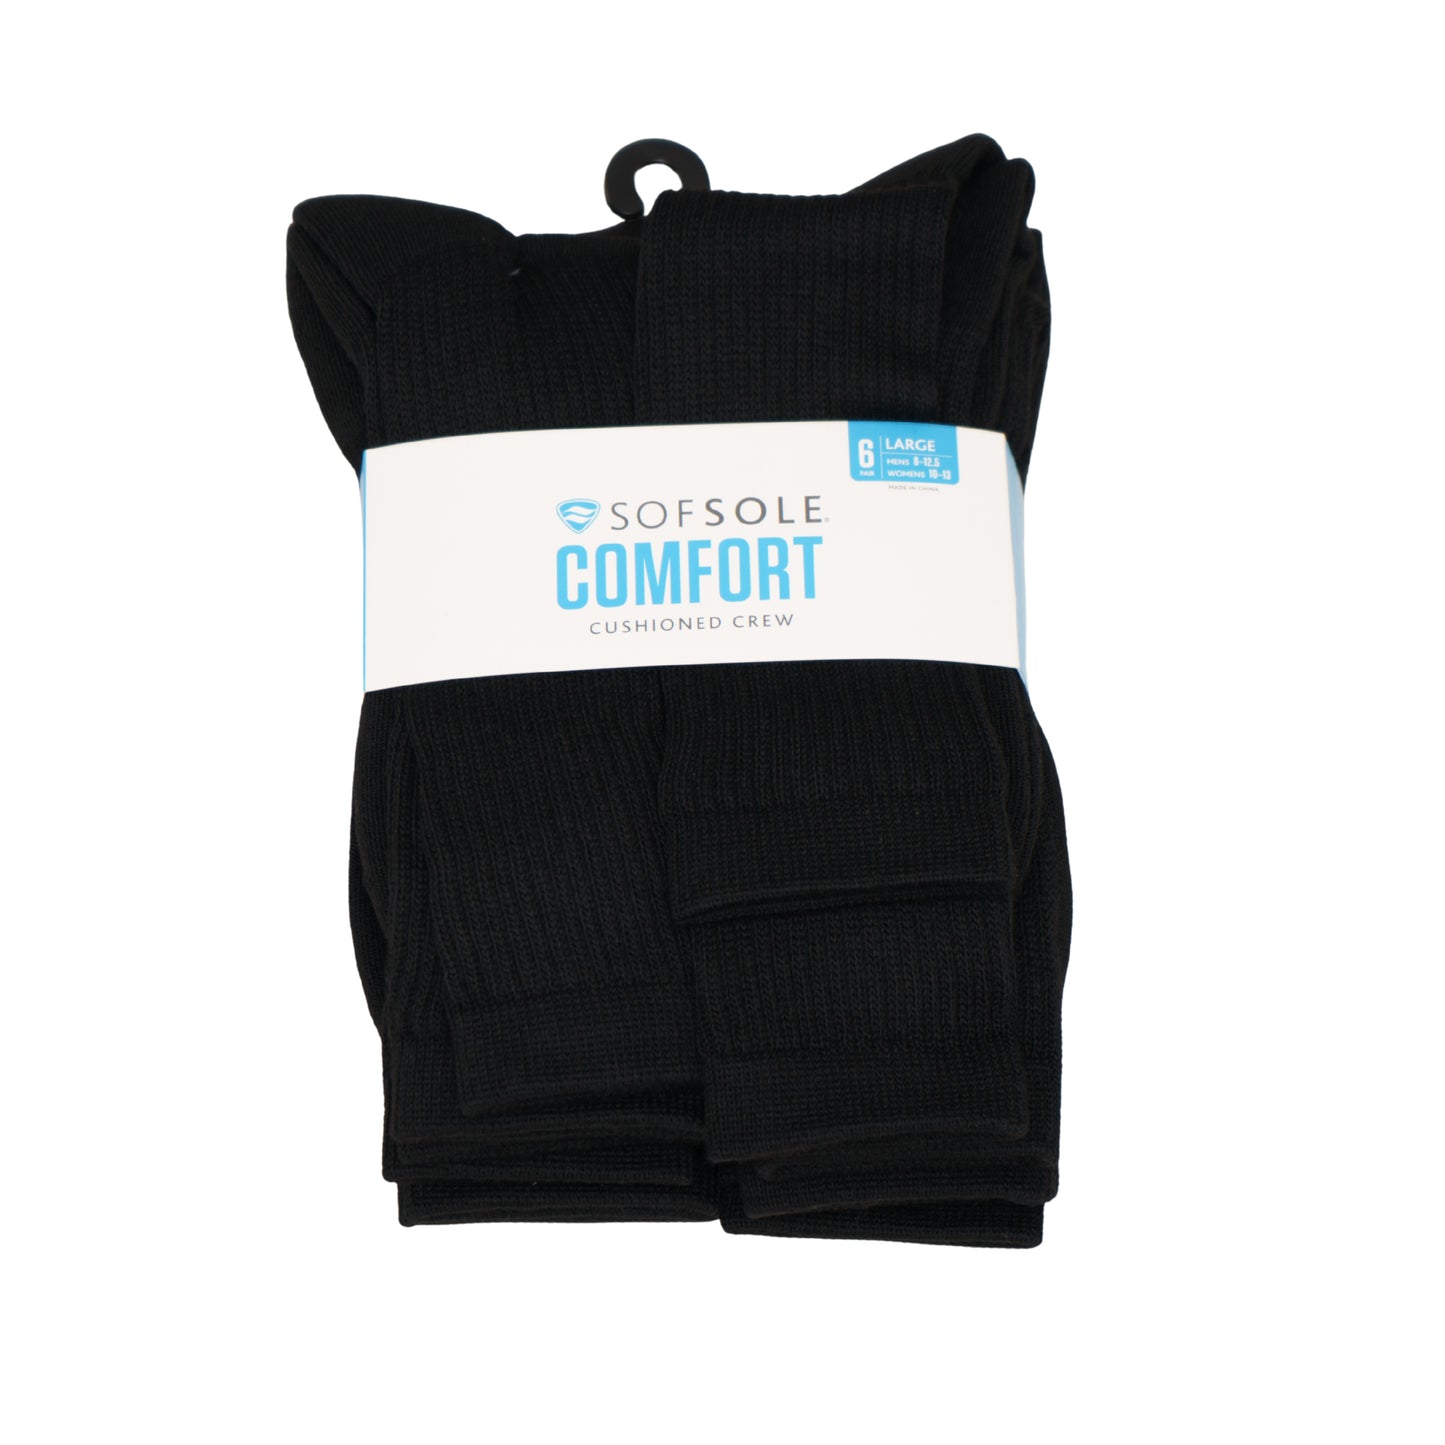 Sof Sole Comfort Casual Poly Blend Cushion Crew - Black